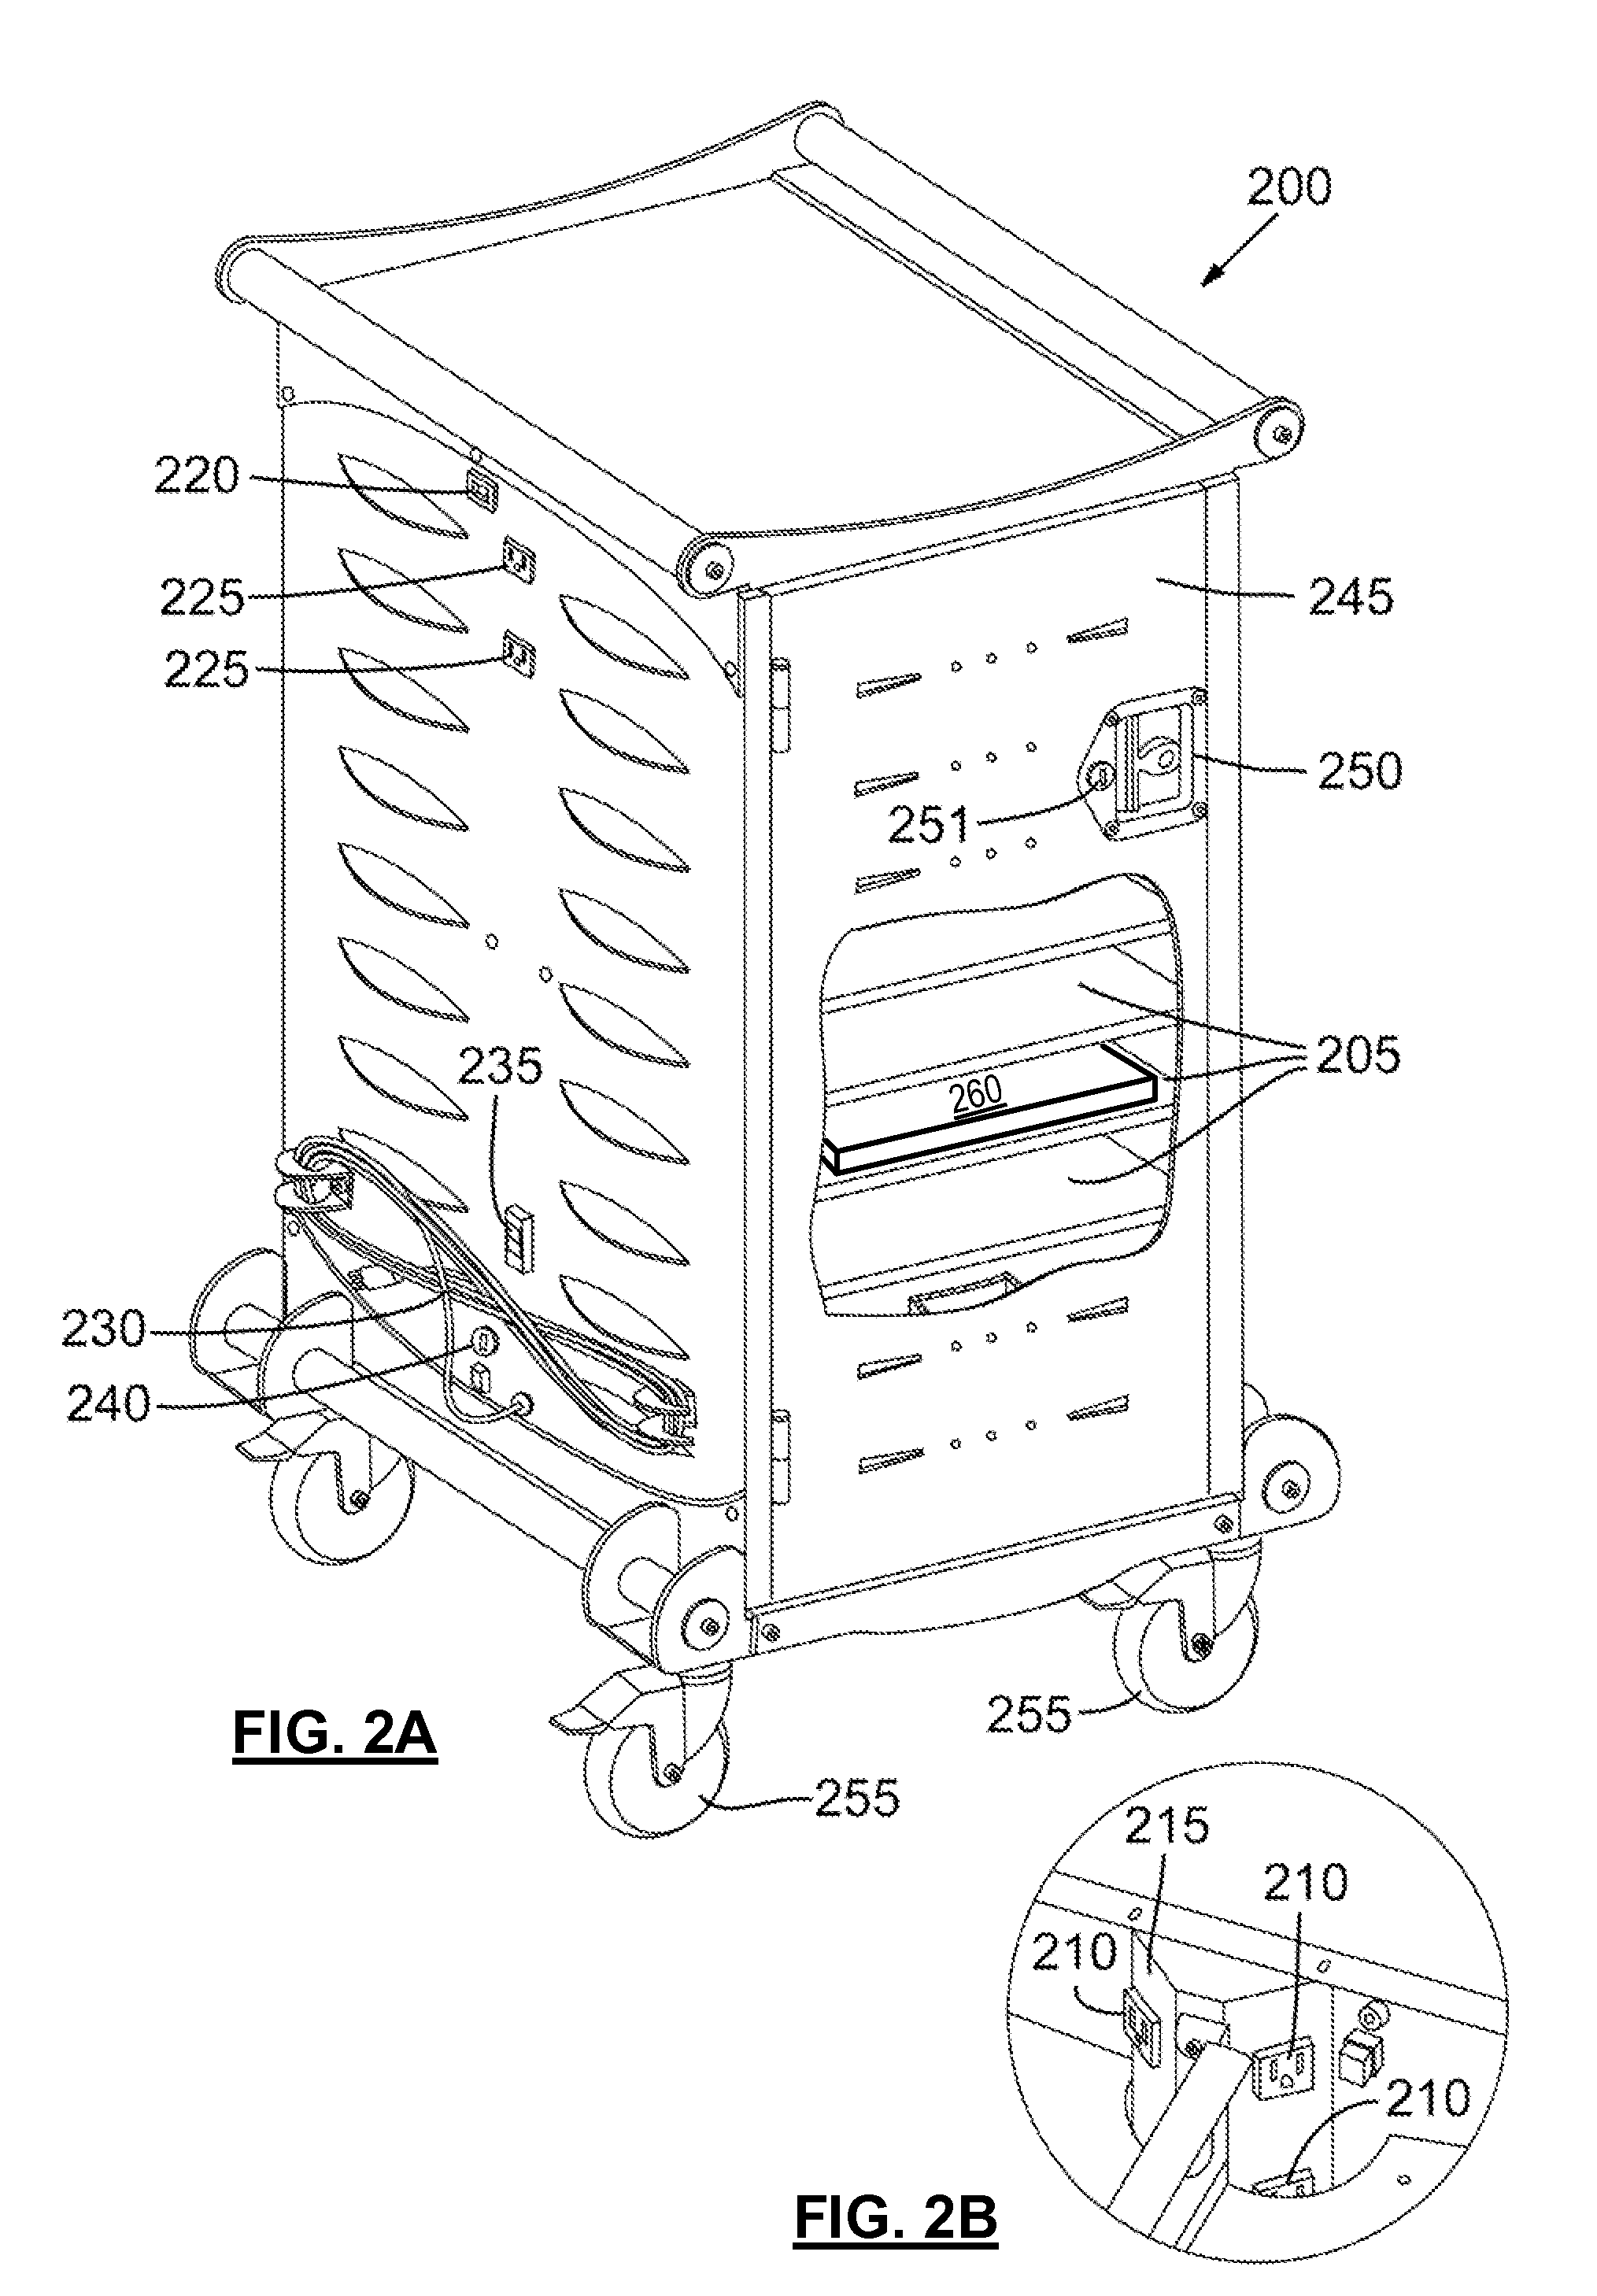 Laptop computer storage and battery charging systems and methods including transient current inrush limiter